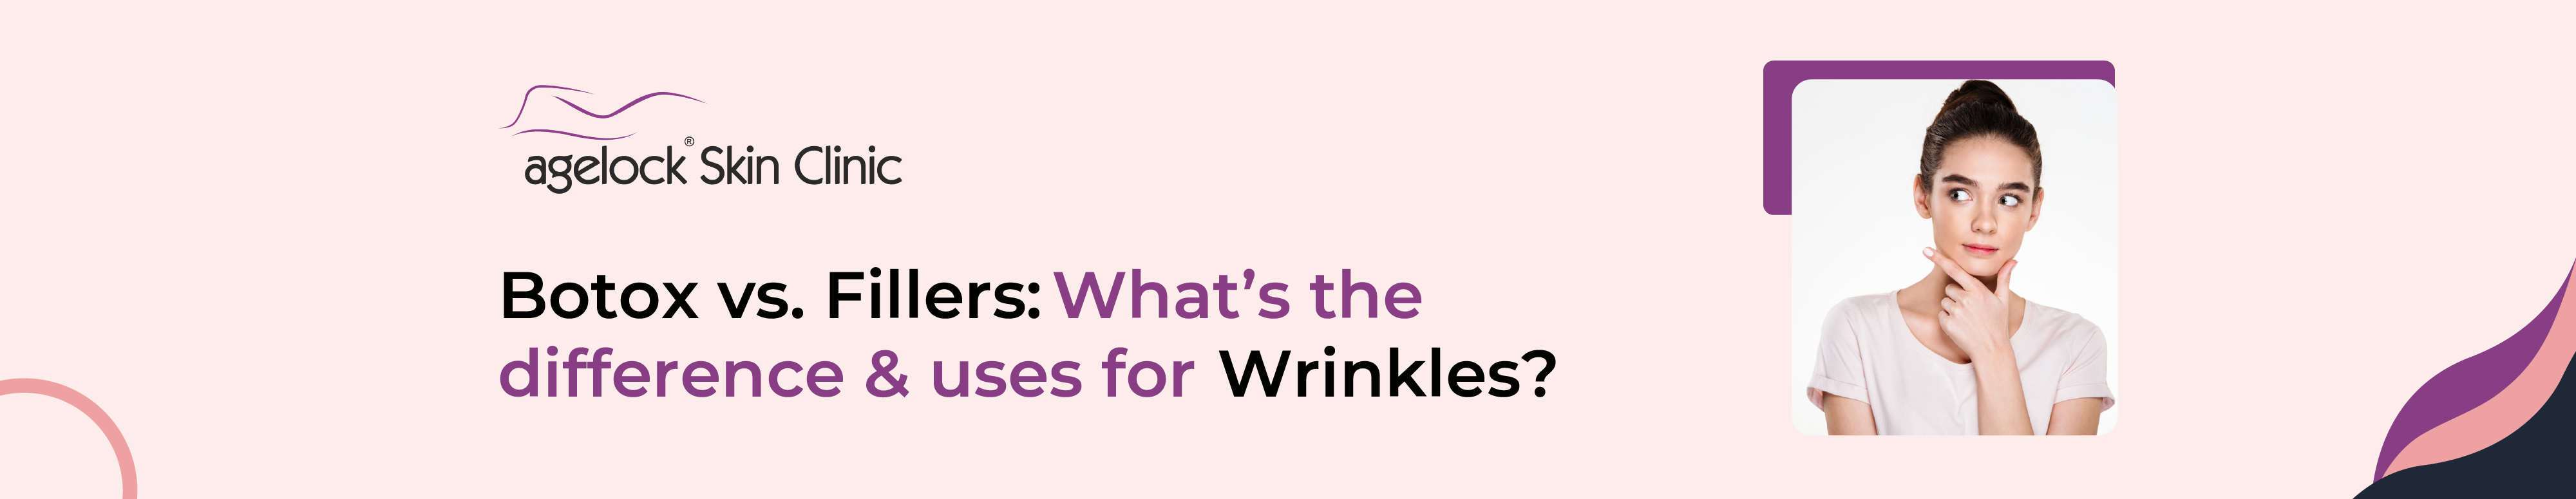 <strong>Botox vs. Fillers: What’s the difference & uses for Wrinkles?</strong>